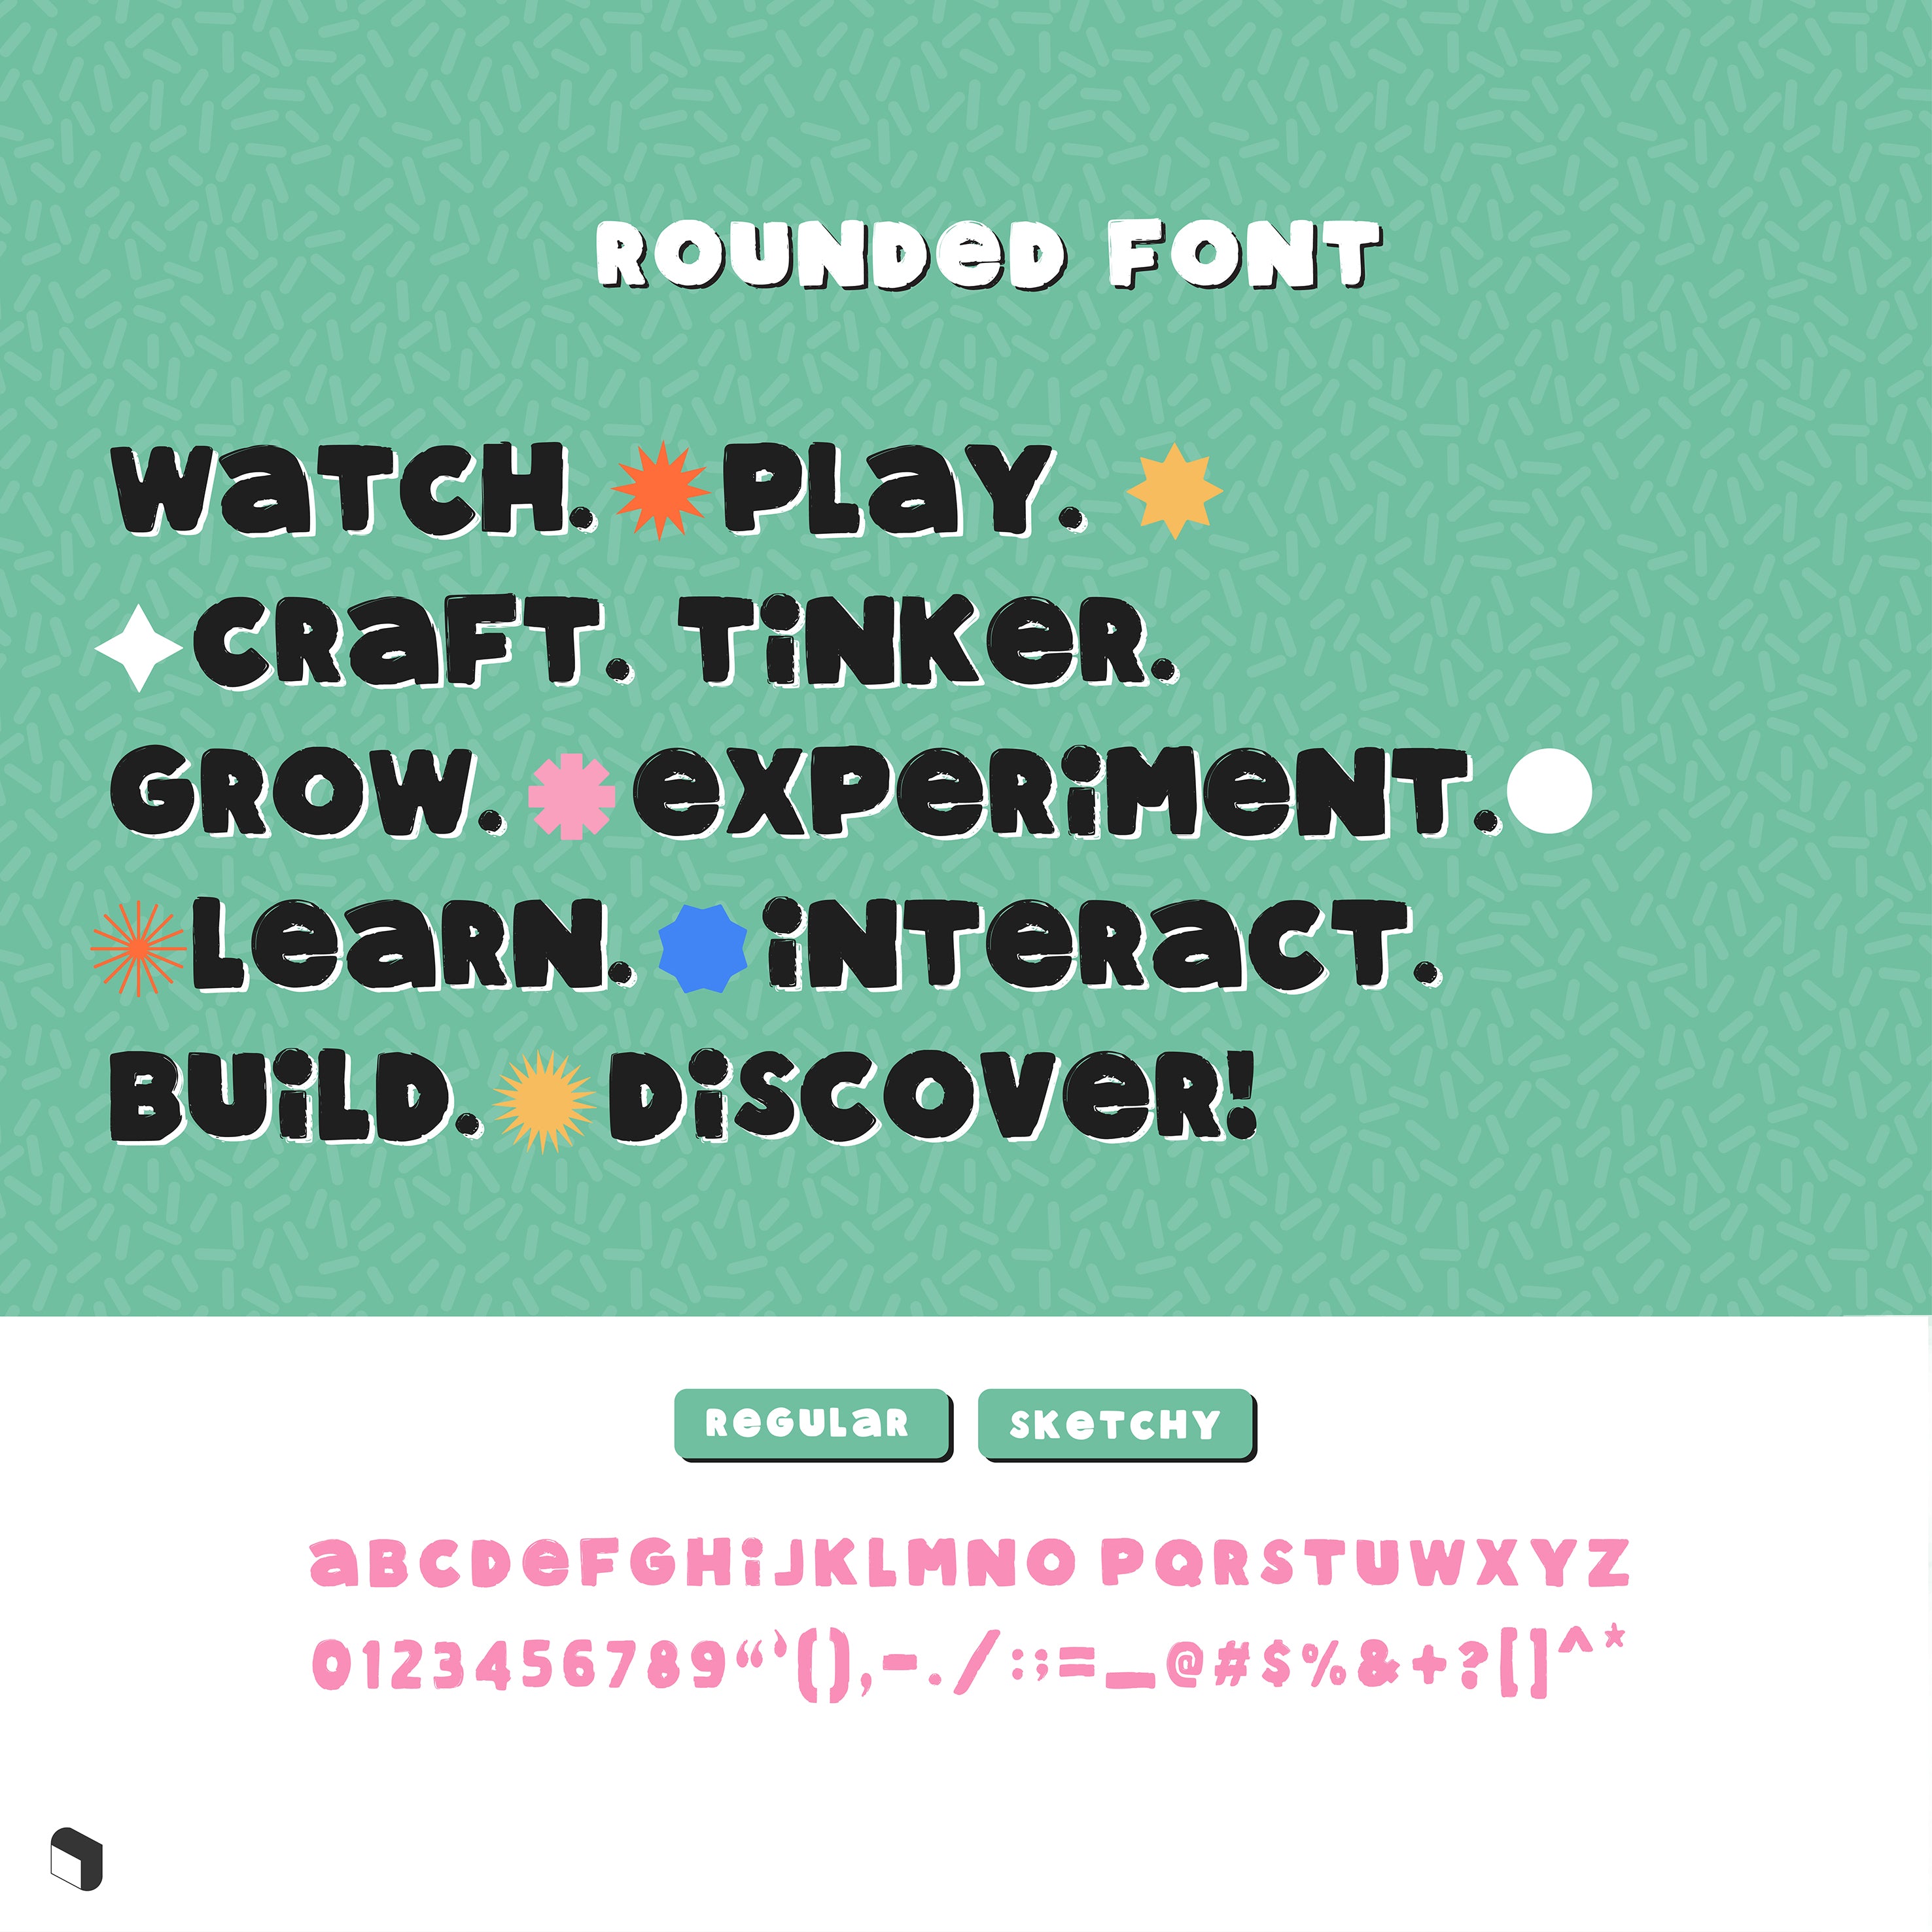 Rounded Font PNG - Toffu Co